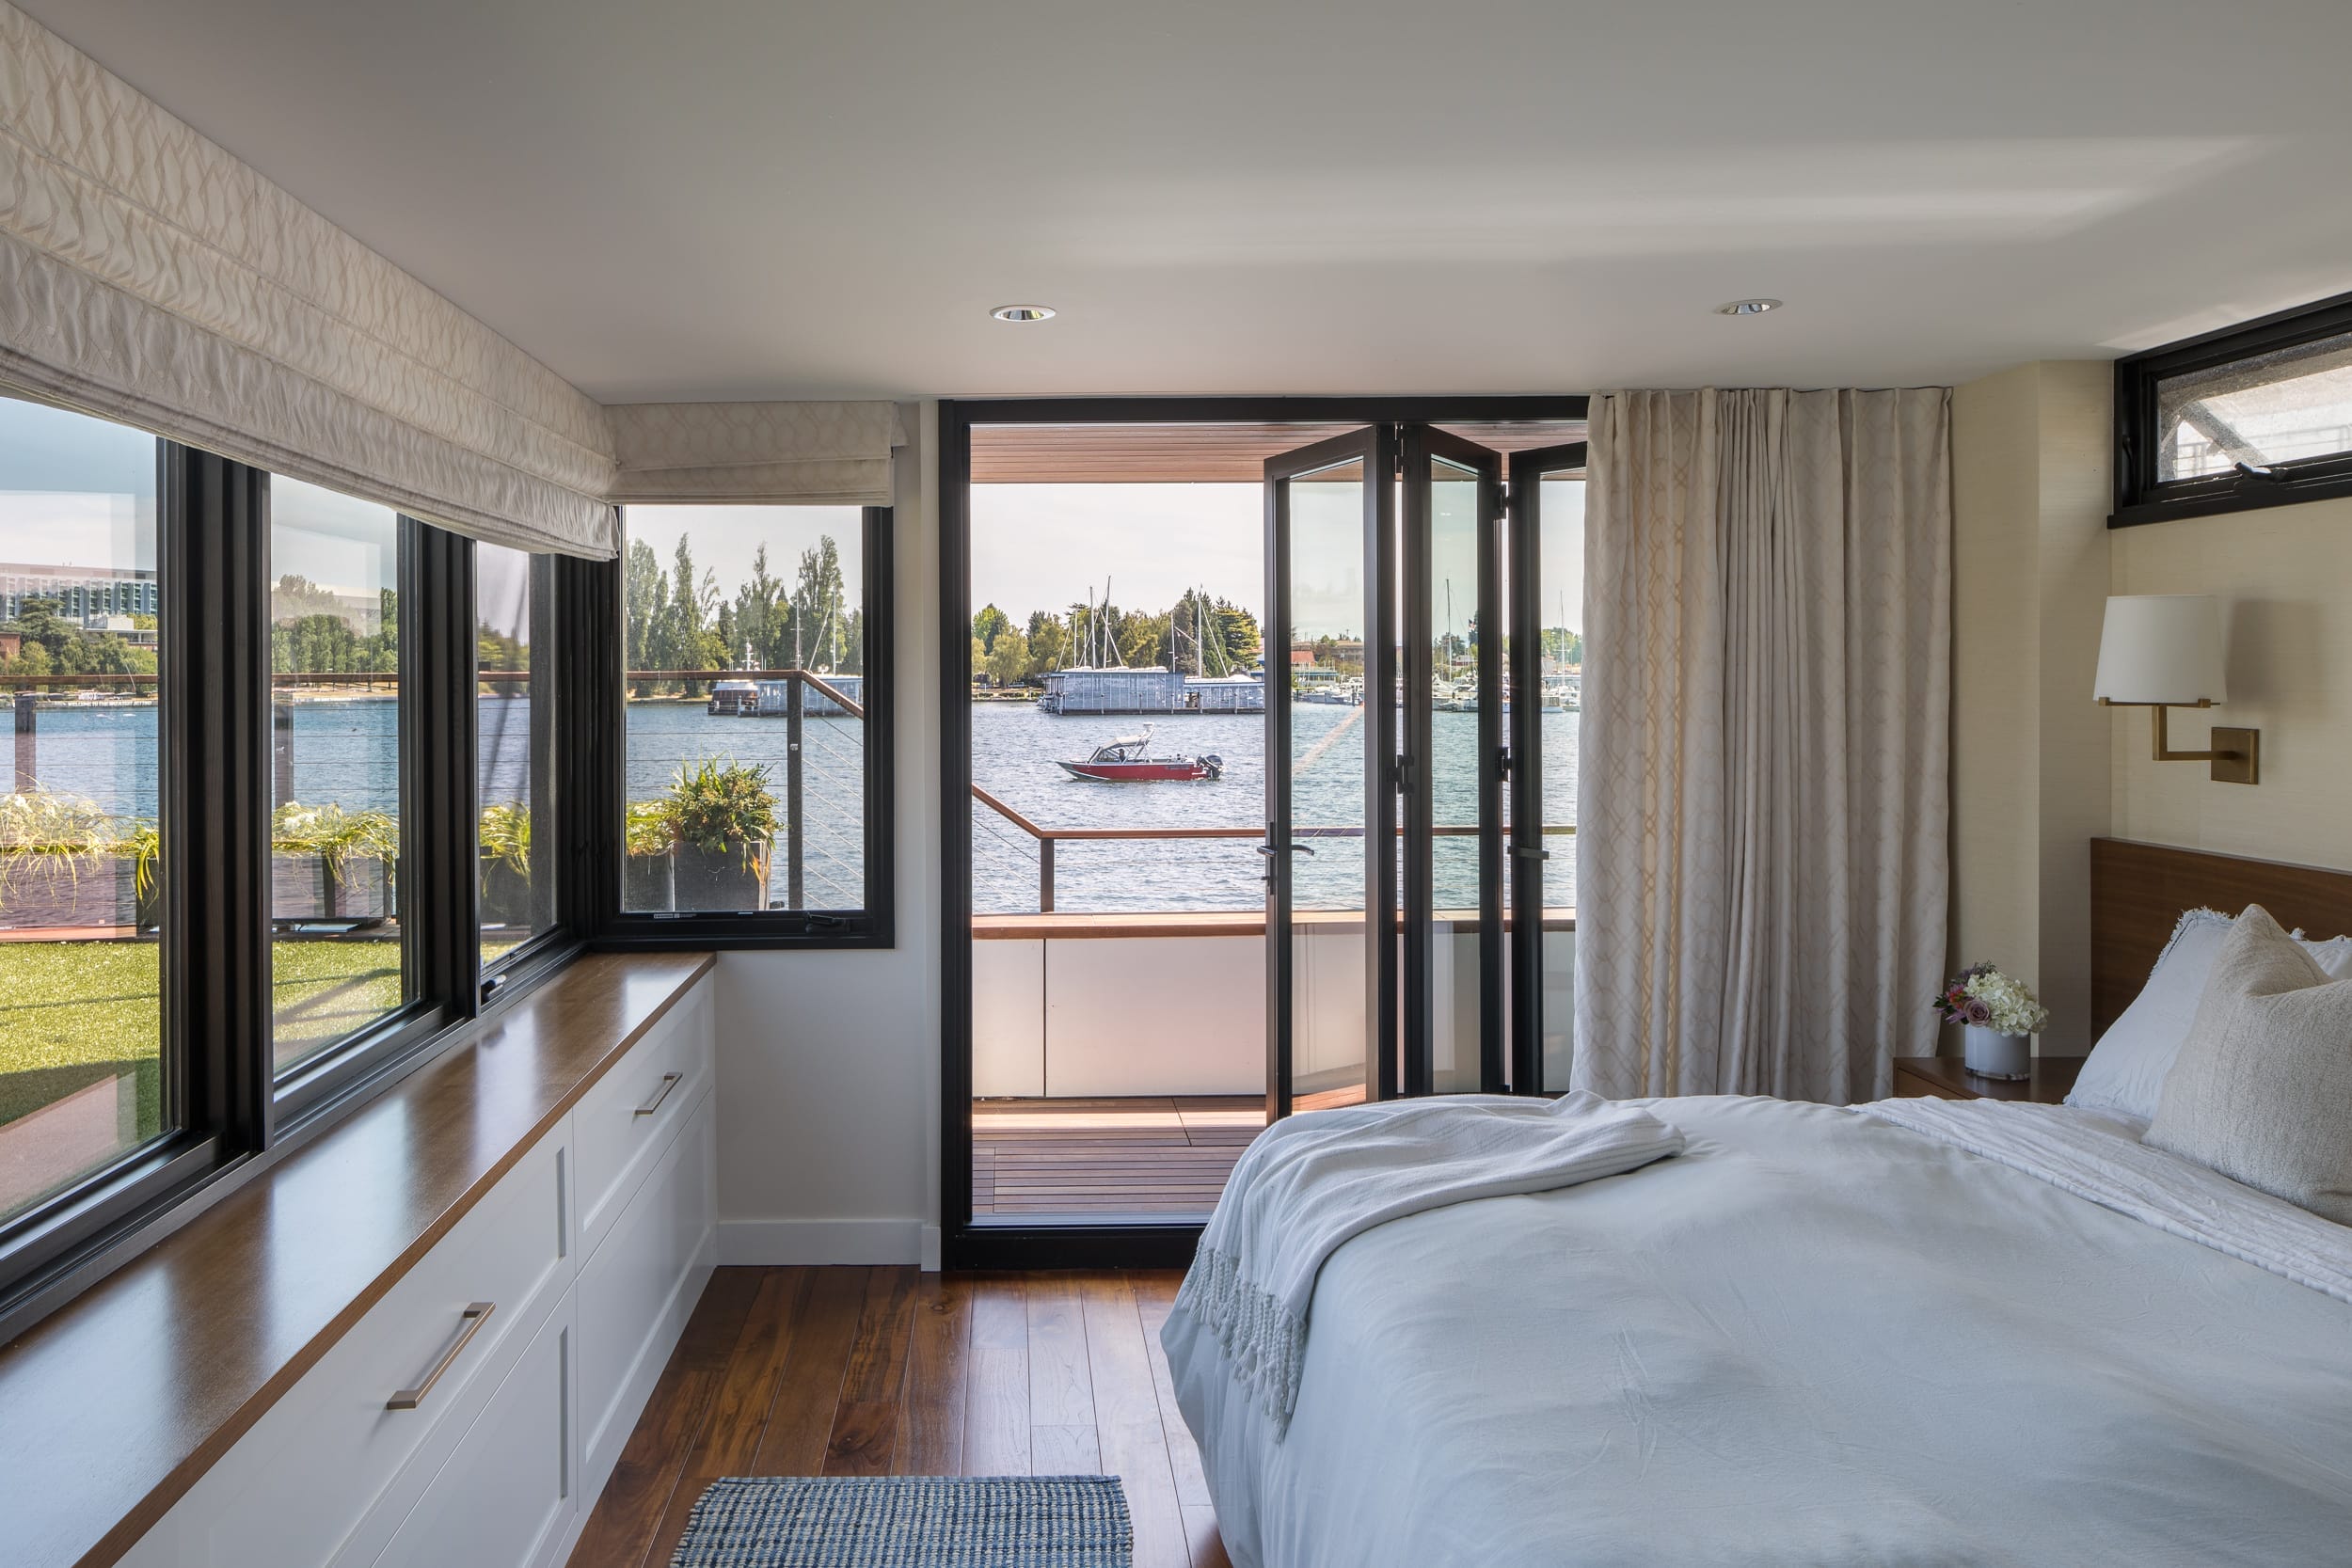 A modern bedroom with a large window overlooking the water in a floating home.